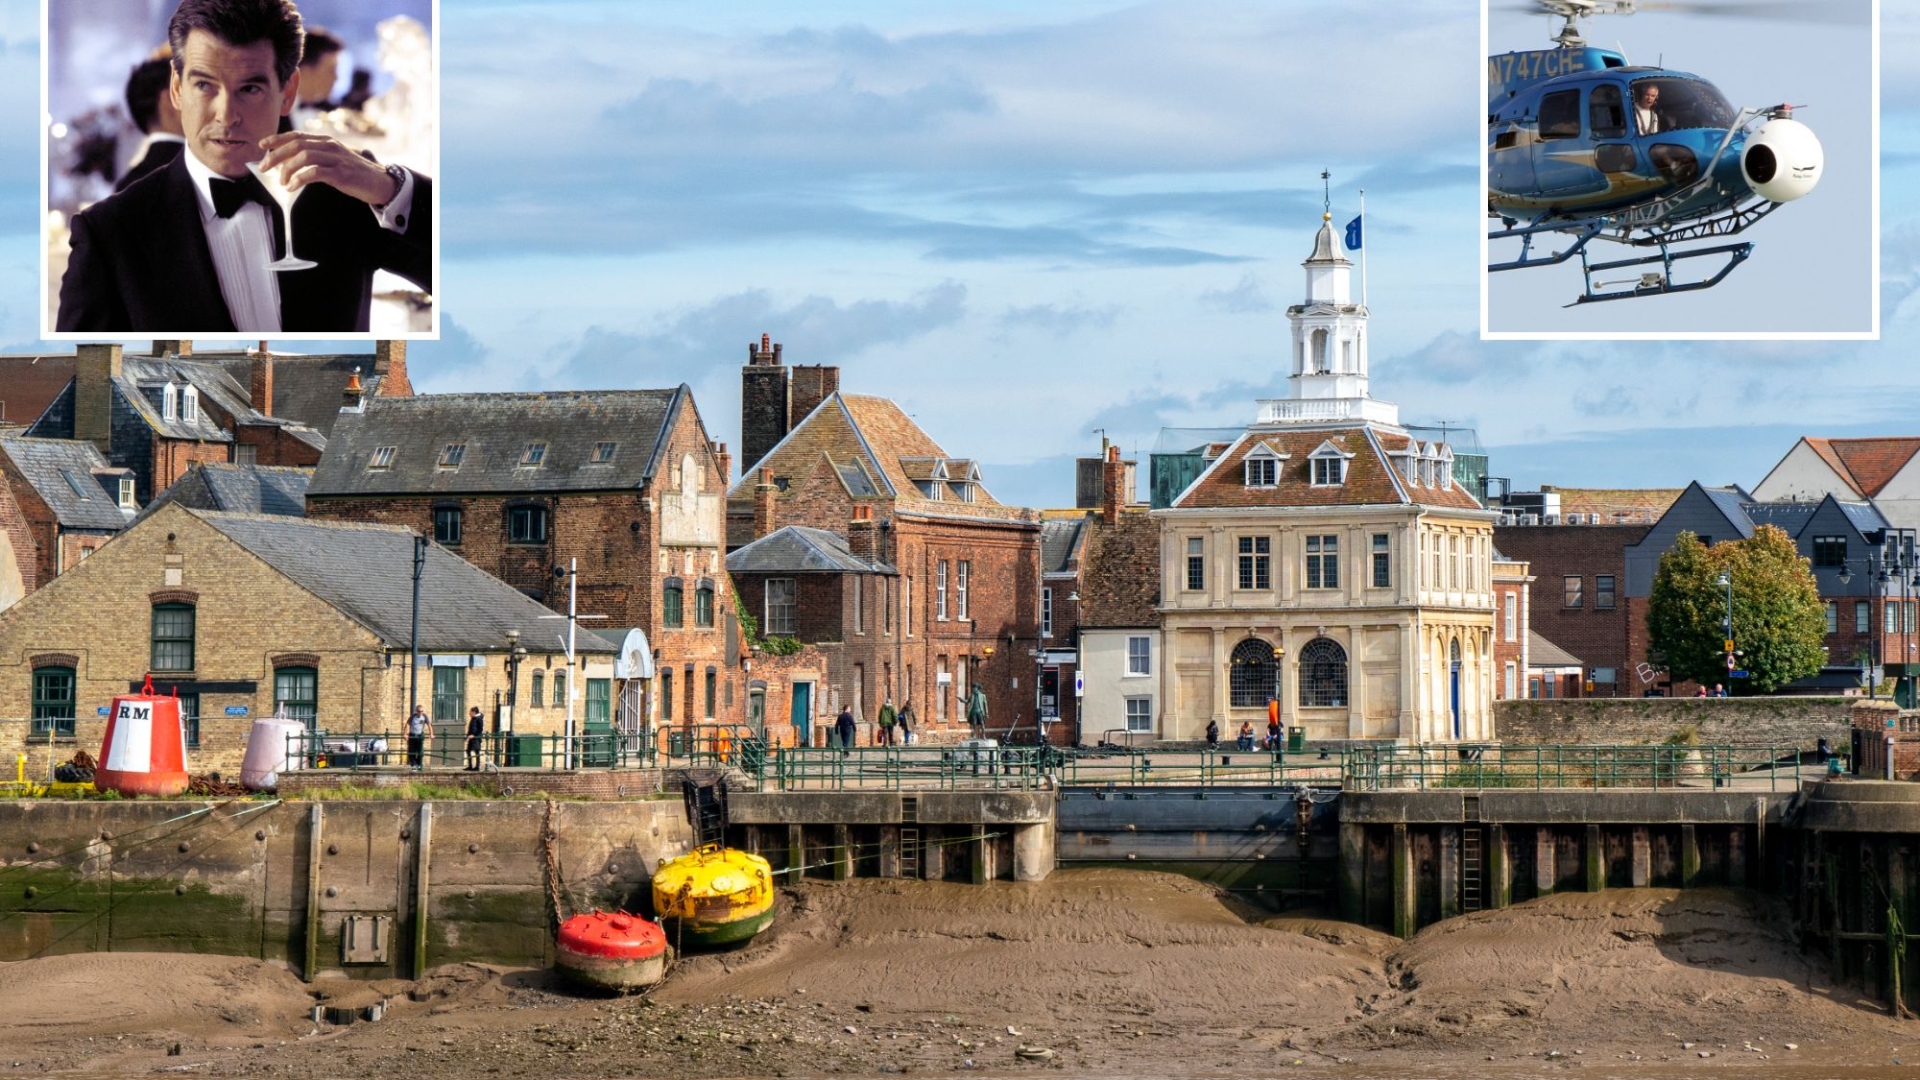 This picturesque UK town has played the Netherlands in many movies, including an amazing James Bond helicopter scene